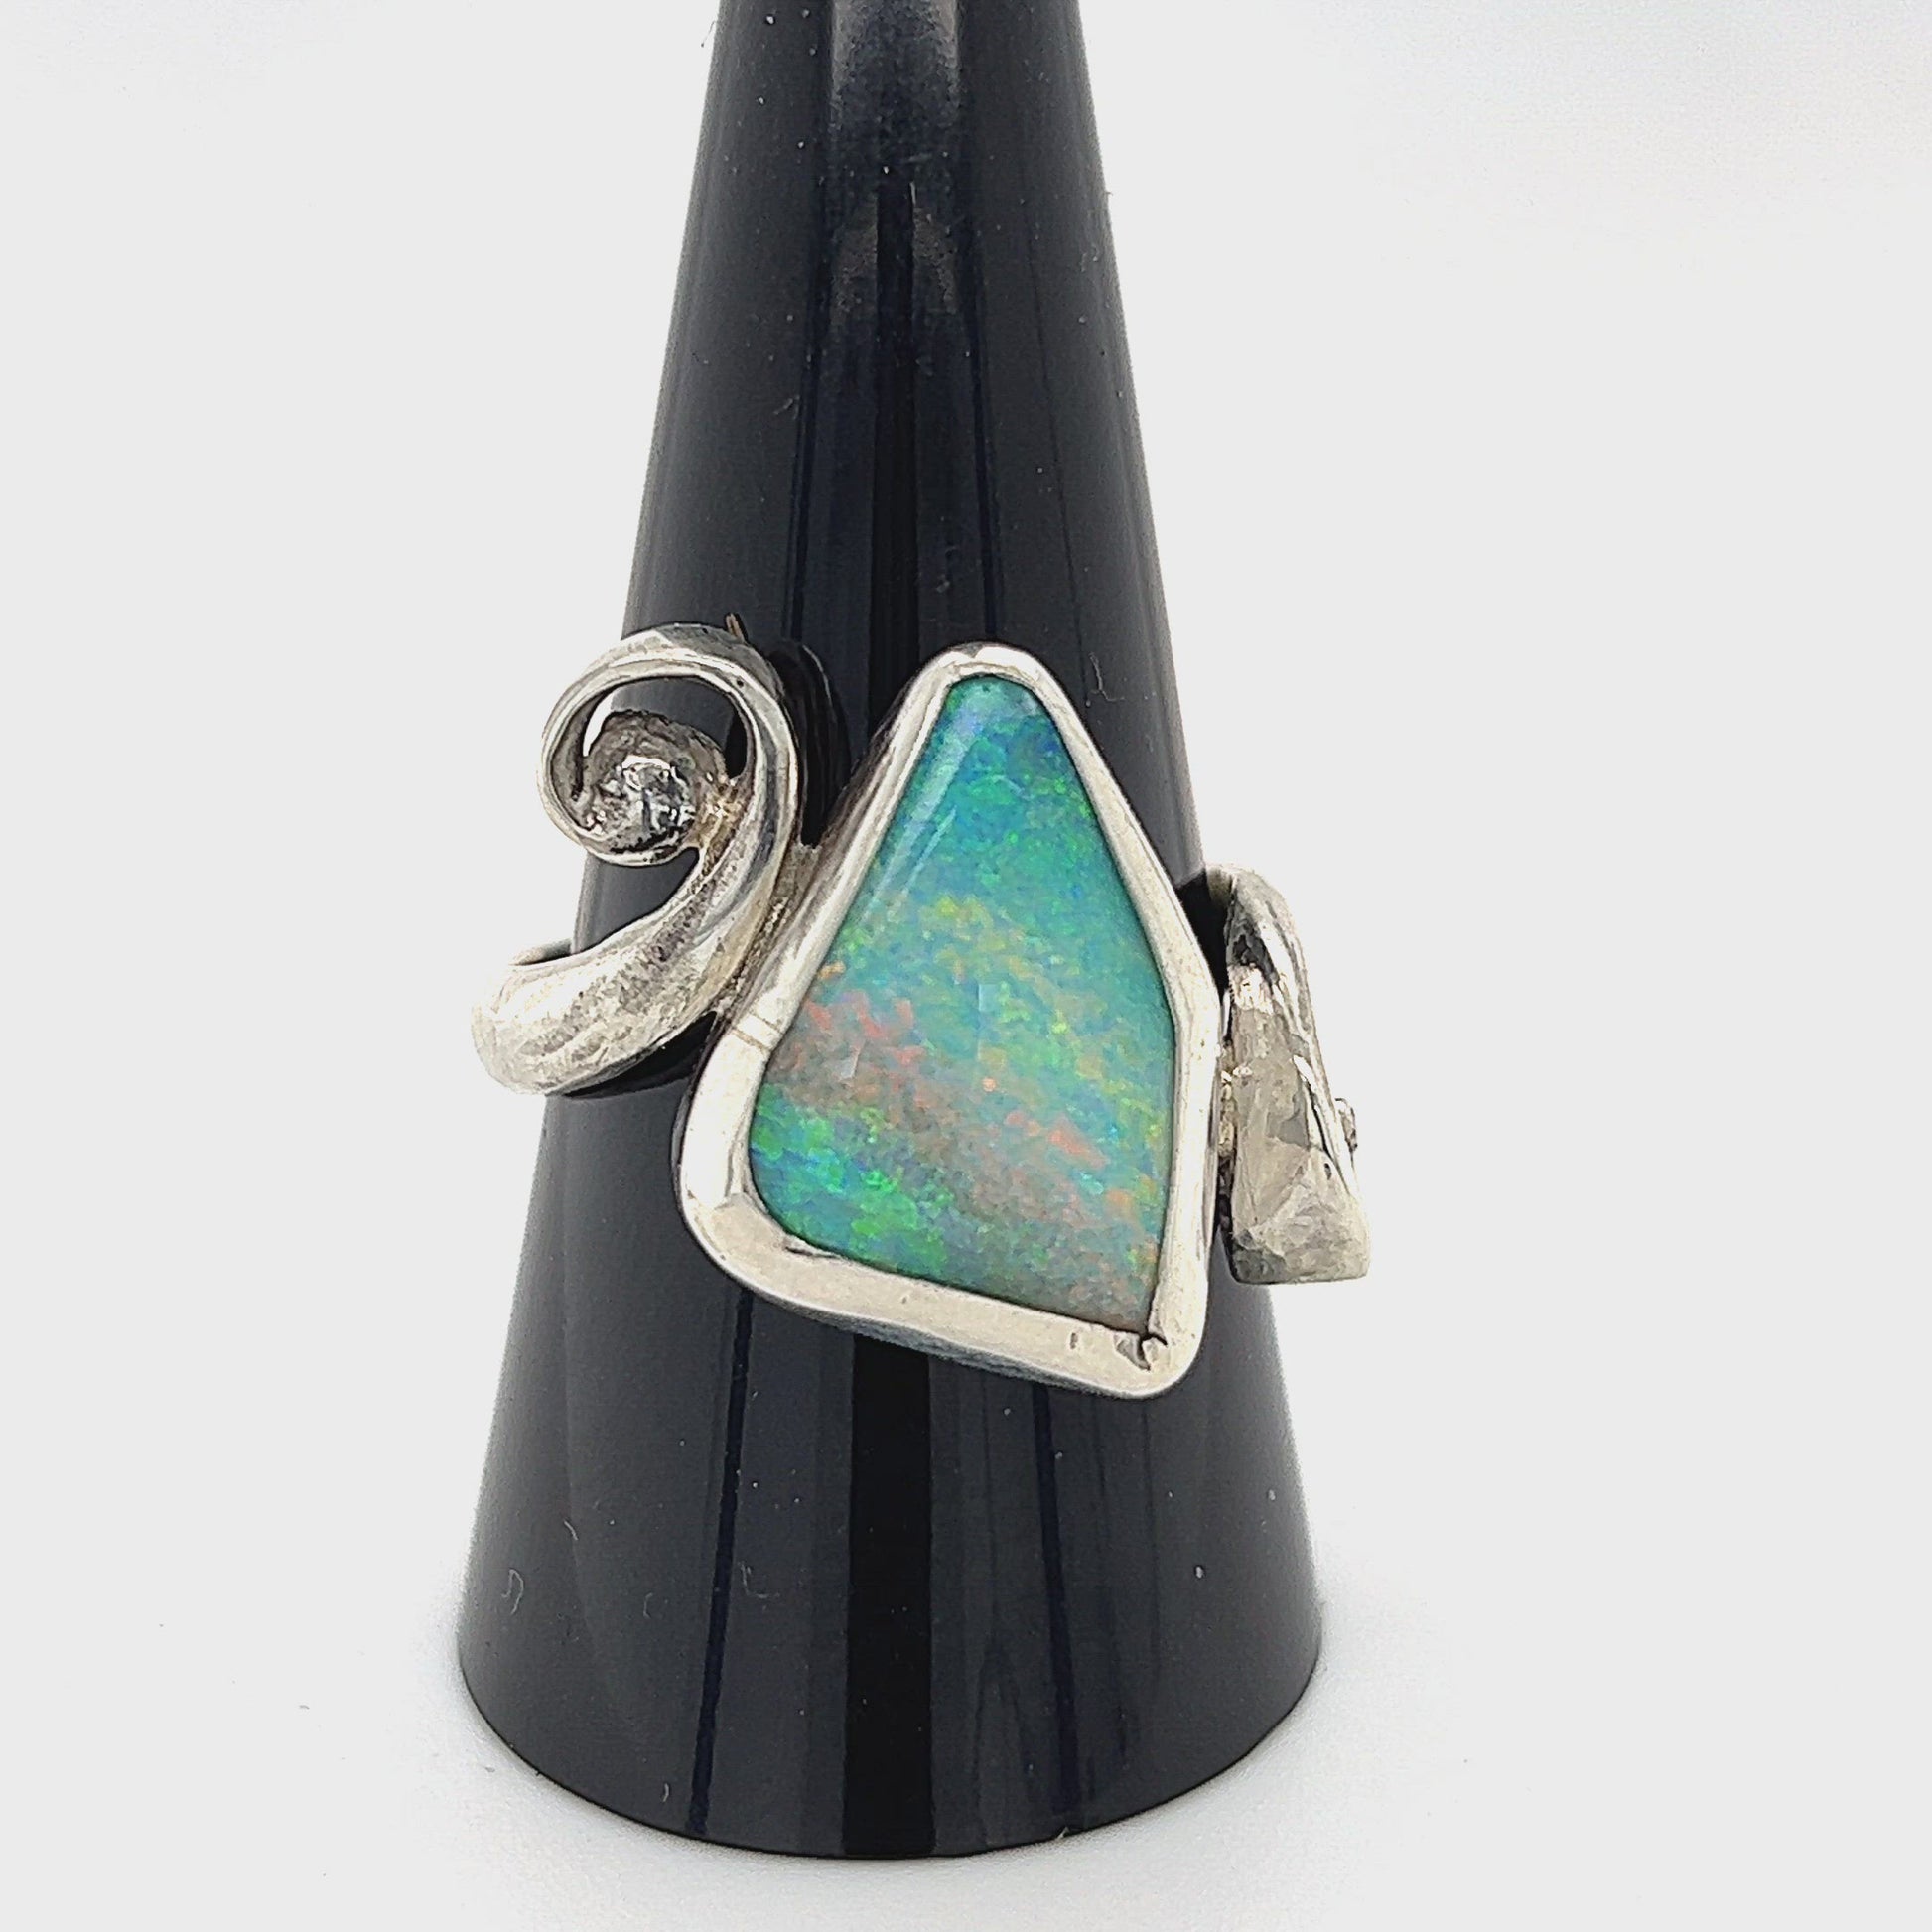 Queensland boulder opal ring set in Argentium silver, hand crafted by our Queensland silversmith. Stunning colours in this unique one-of-a-kind ring.